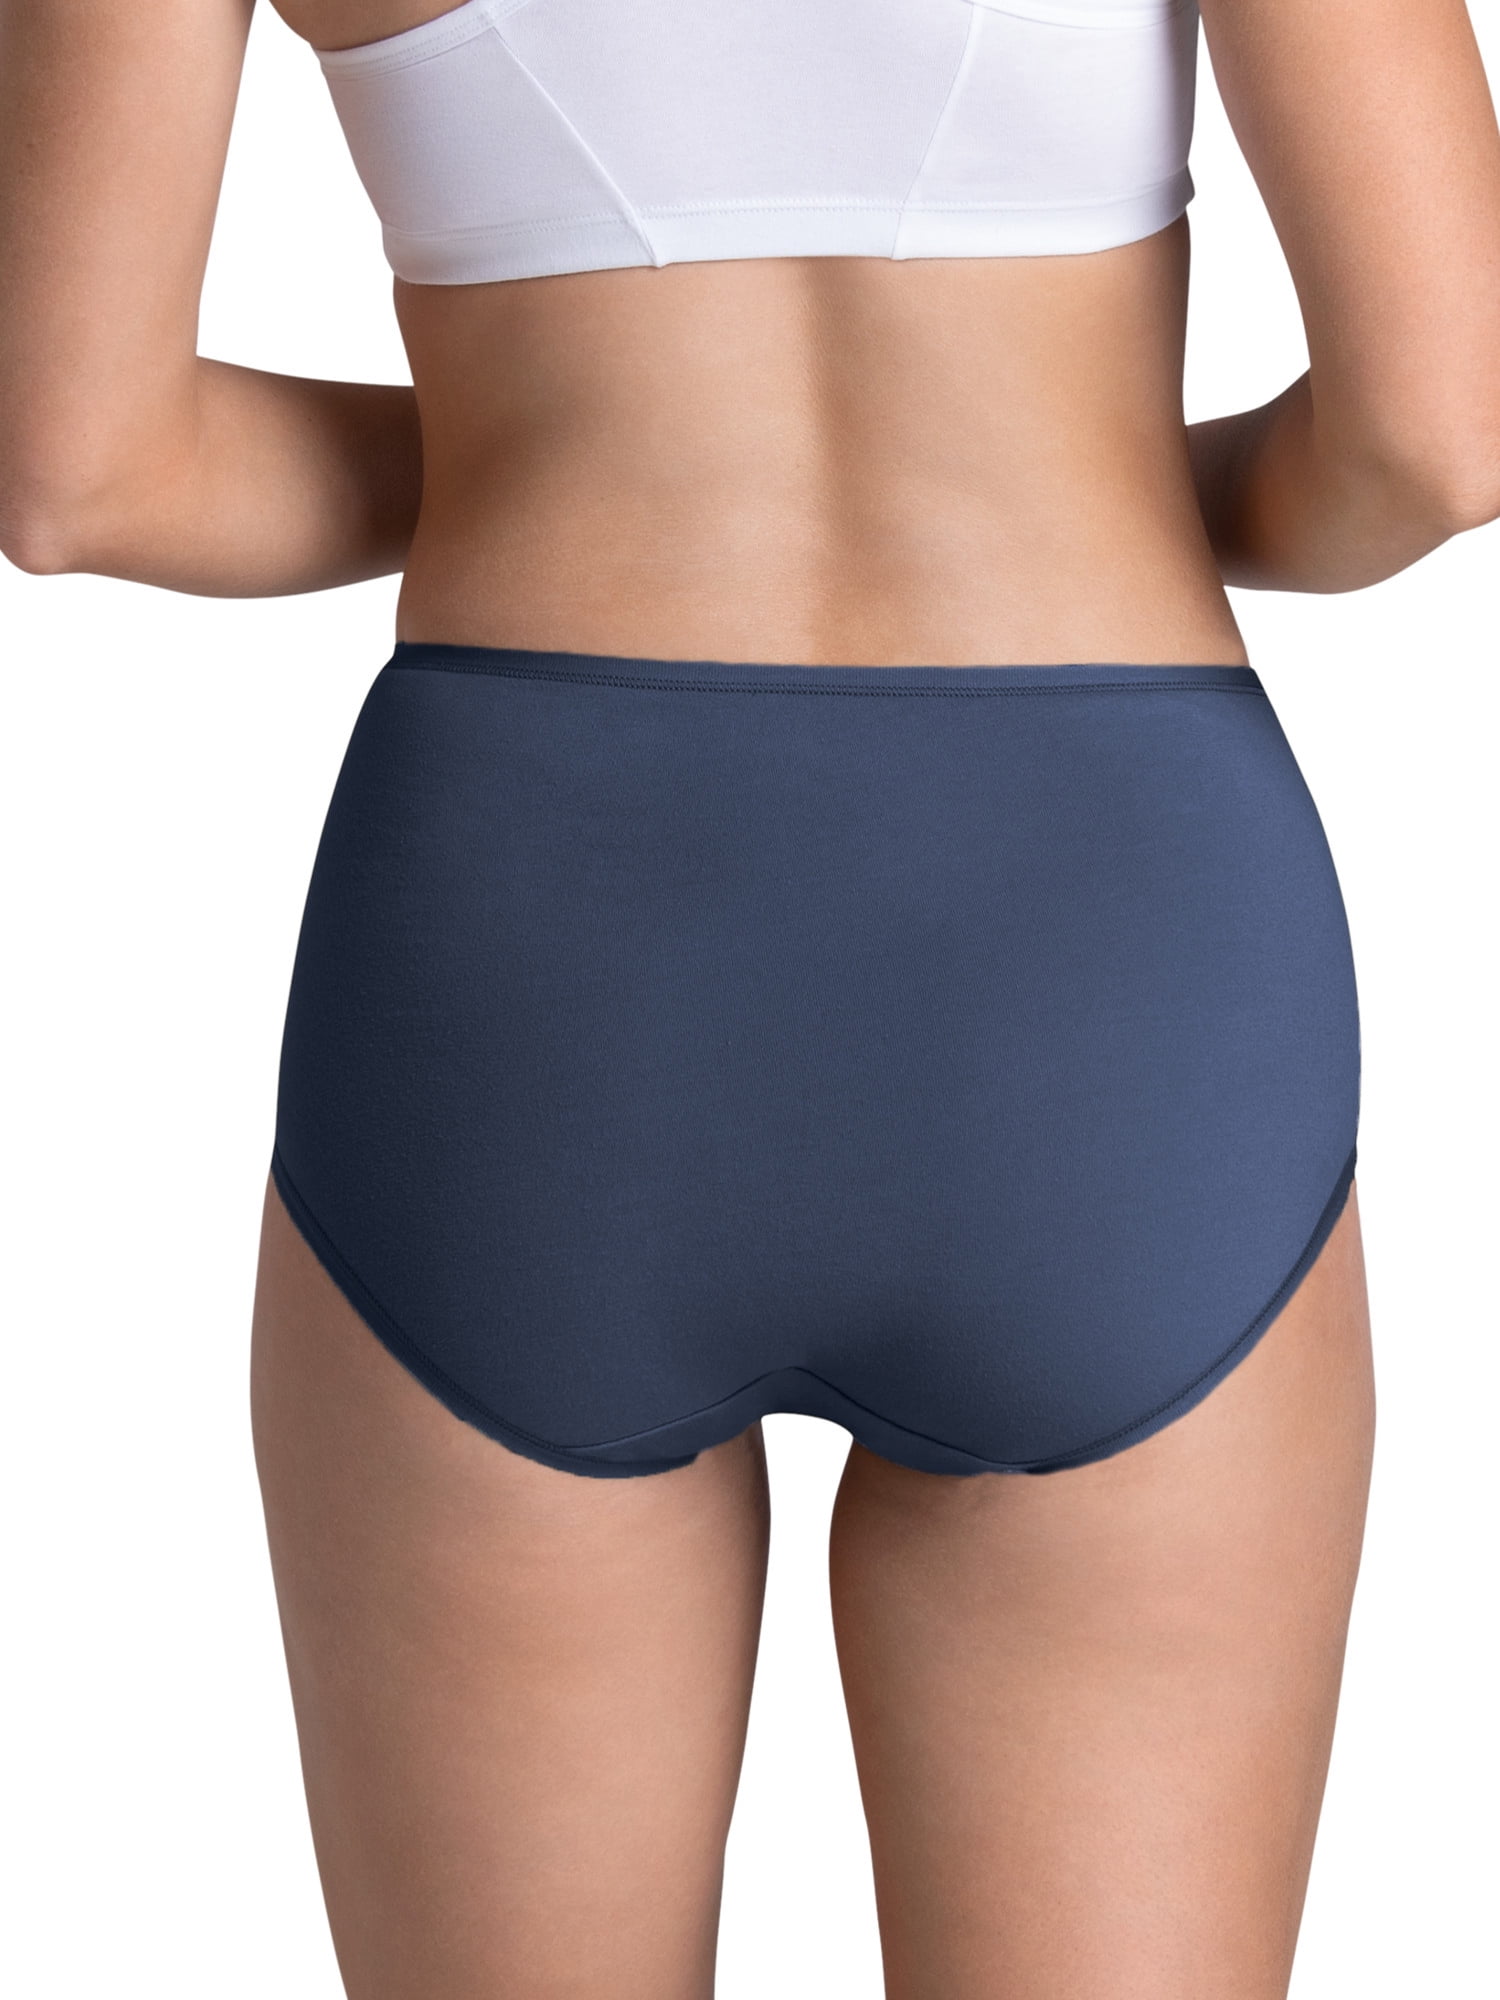 Fruit of the Loom Women's Cotton Stretch Underwear - Comfortable, Soft, and  Perfect Fit